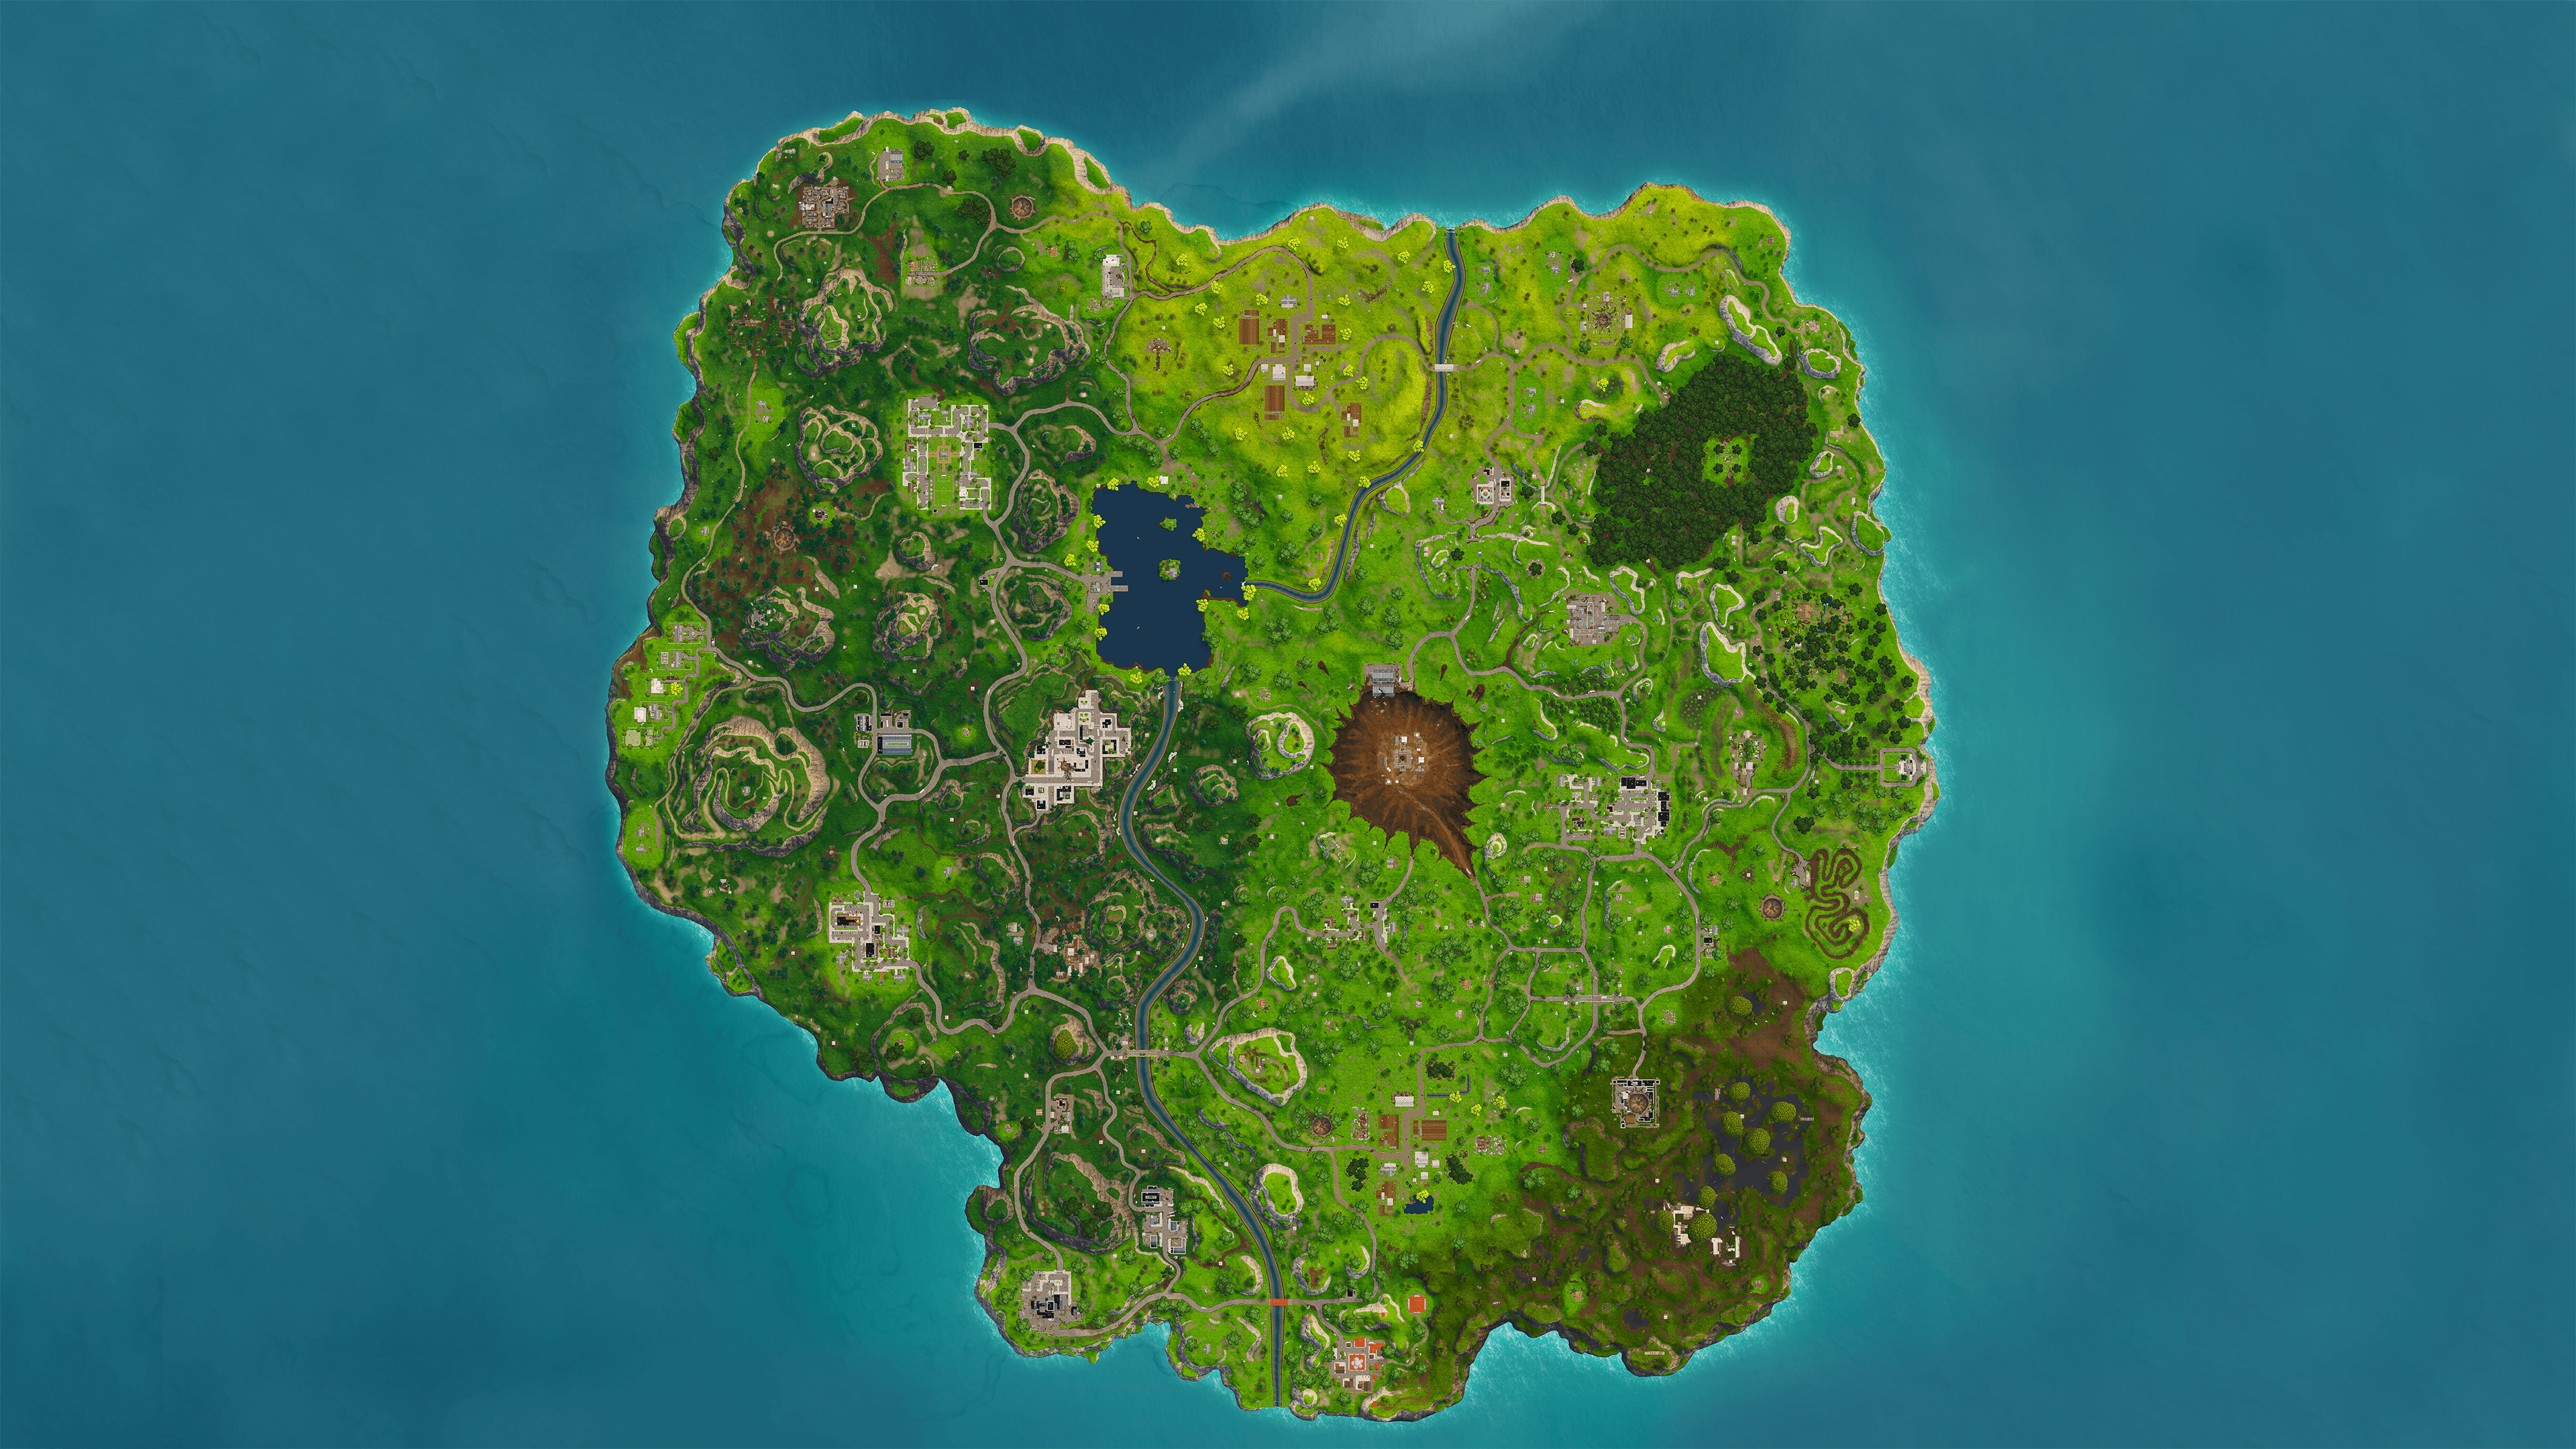 I made a 4K wallpaper of the high quality Season 4 map